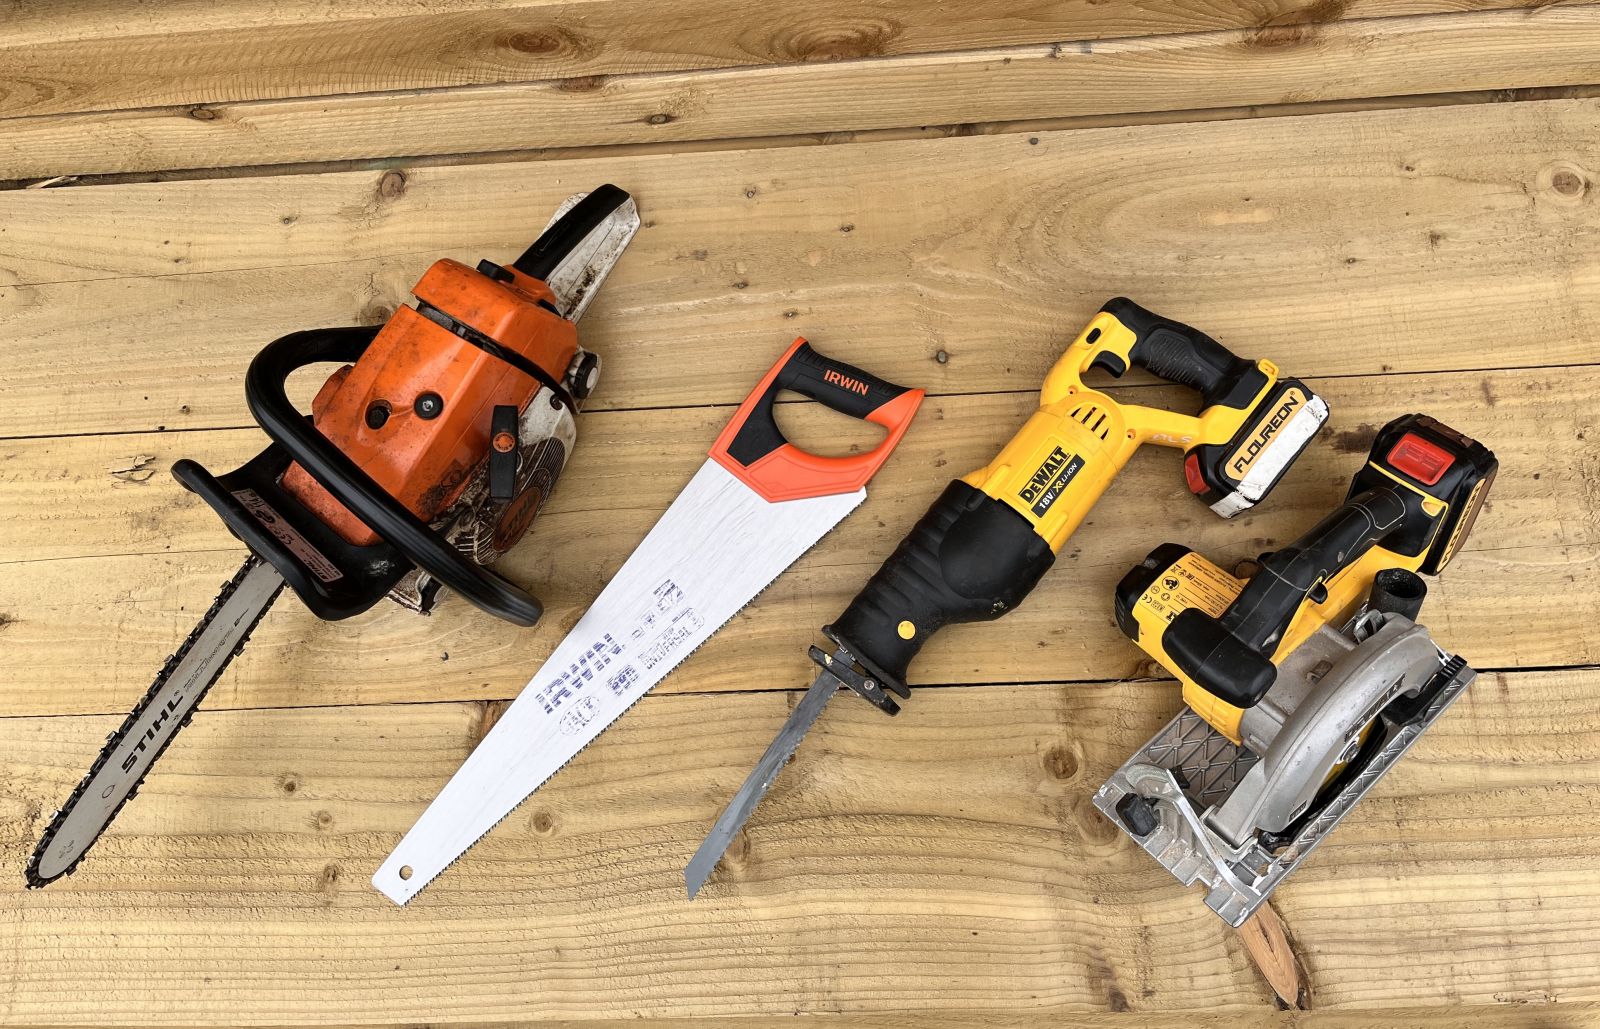 Collection of tools that you can use to cut railway sleepers. Railwaysleepers.com